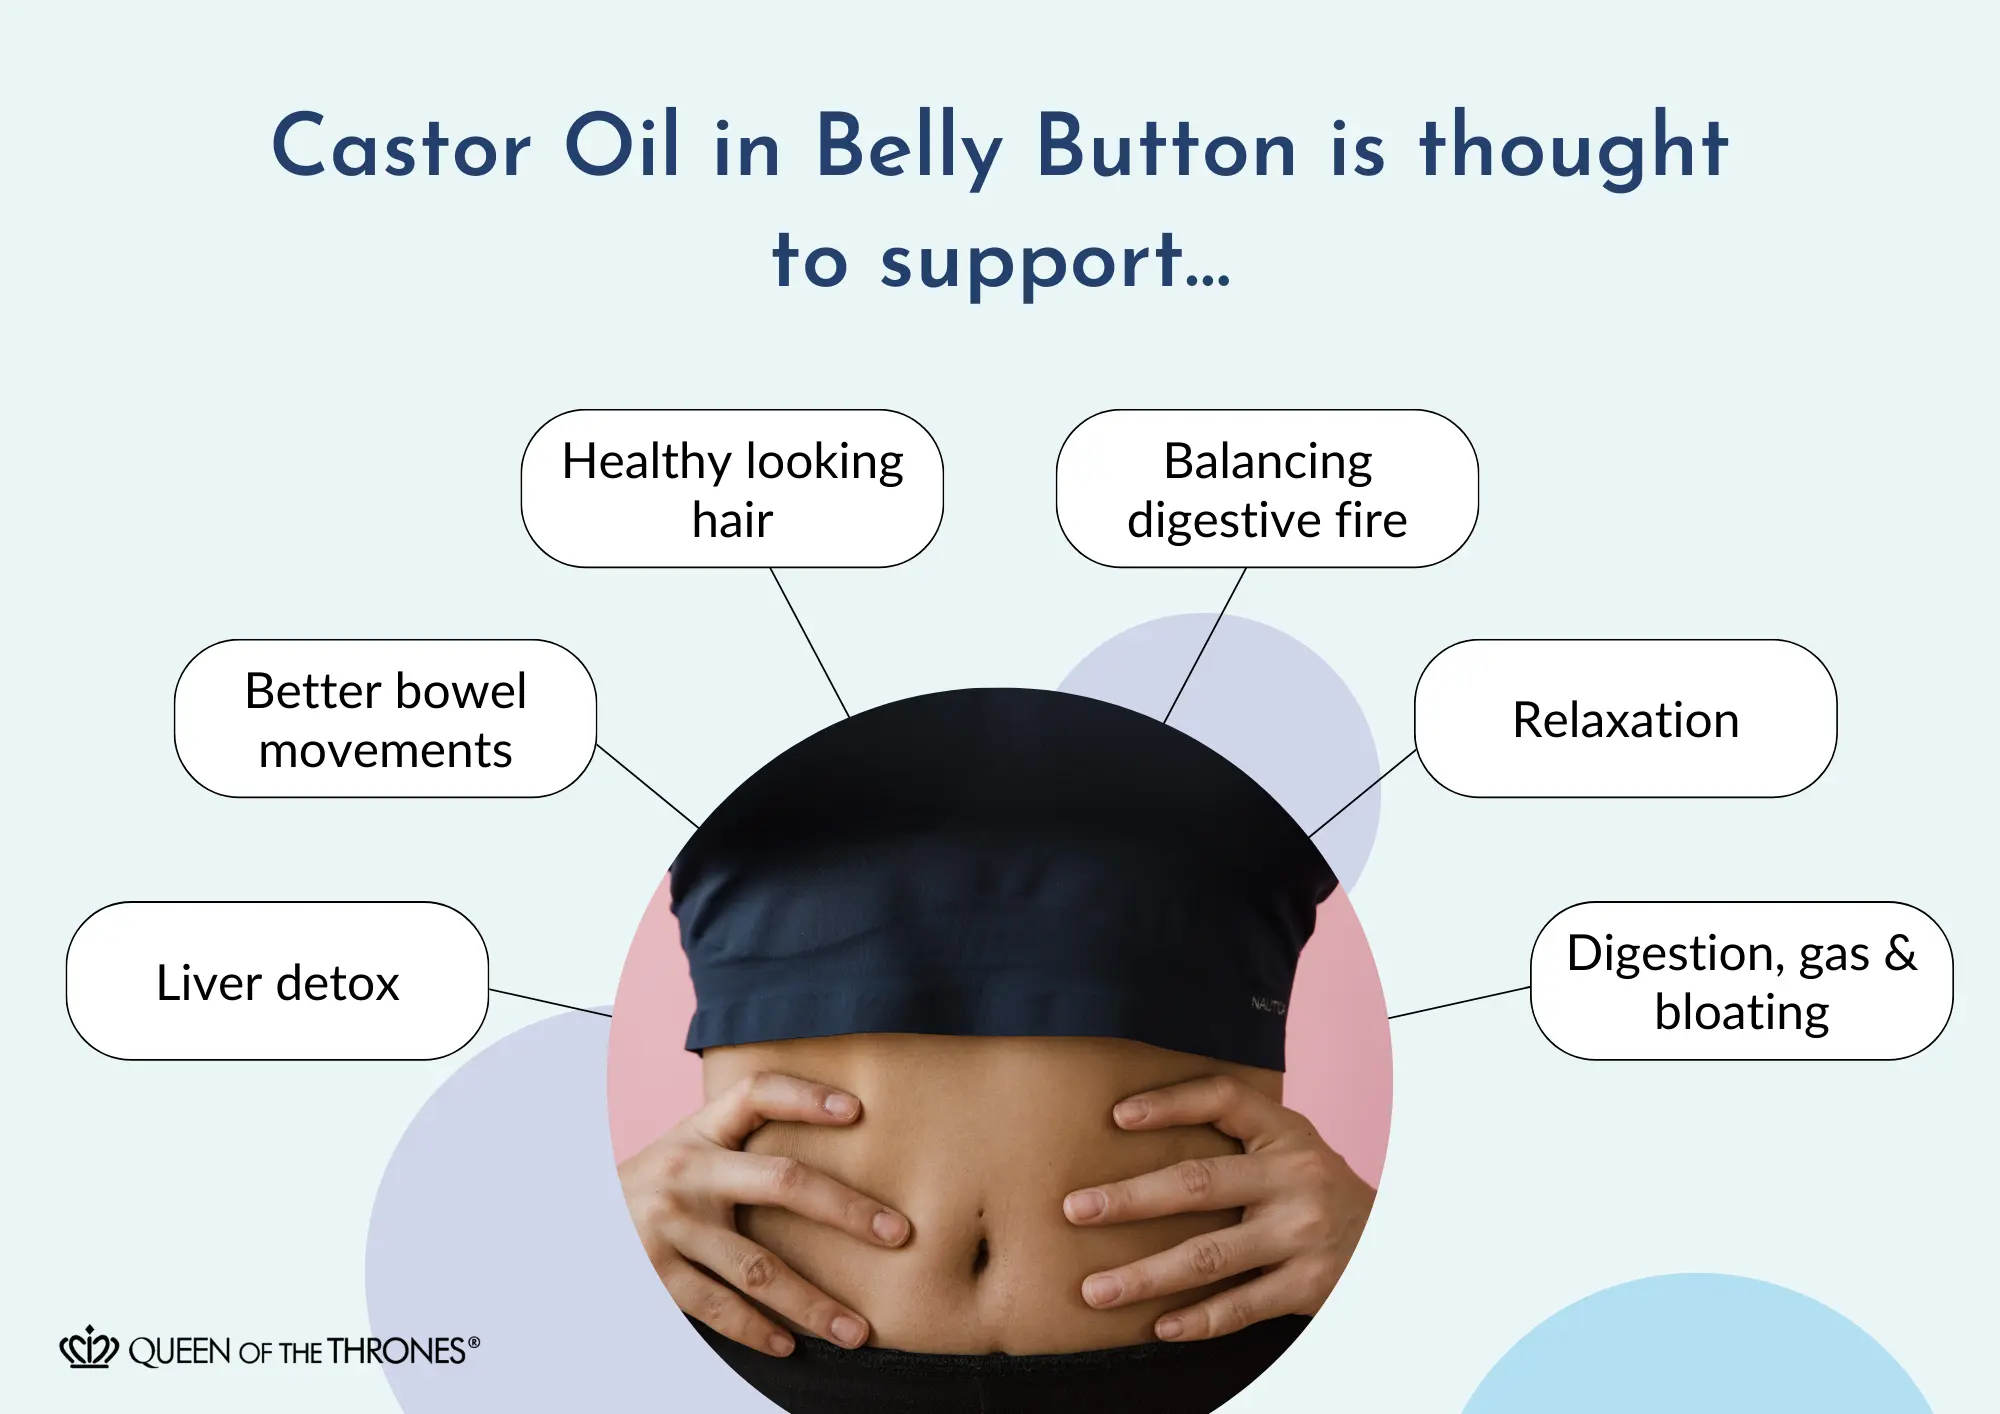 Queen of the Thrones Castor oil in belly button supports different conditons